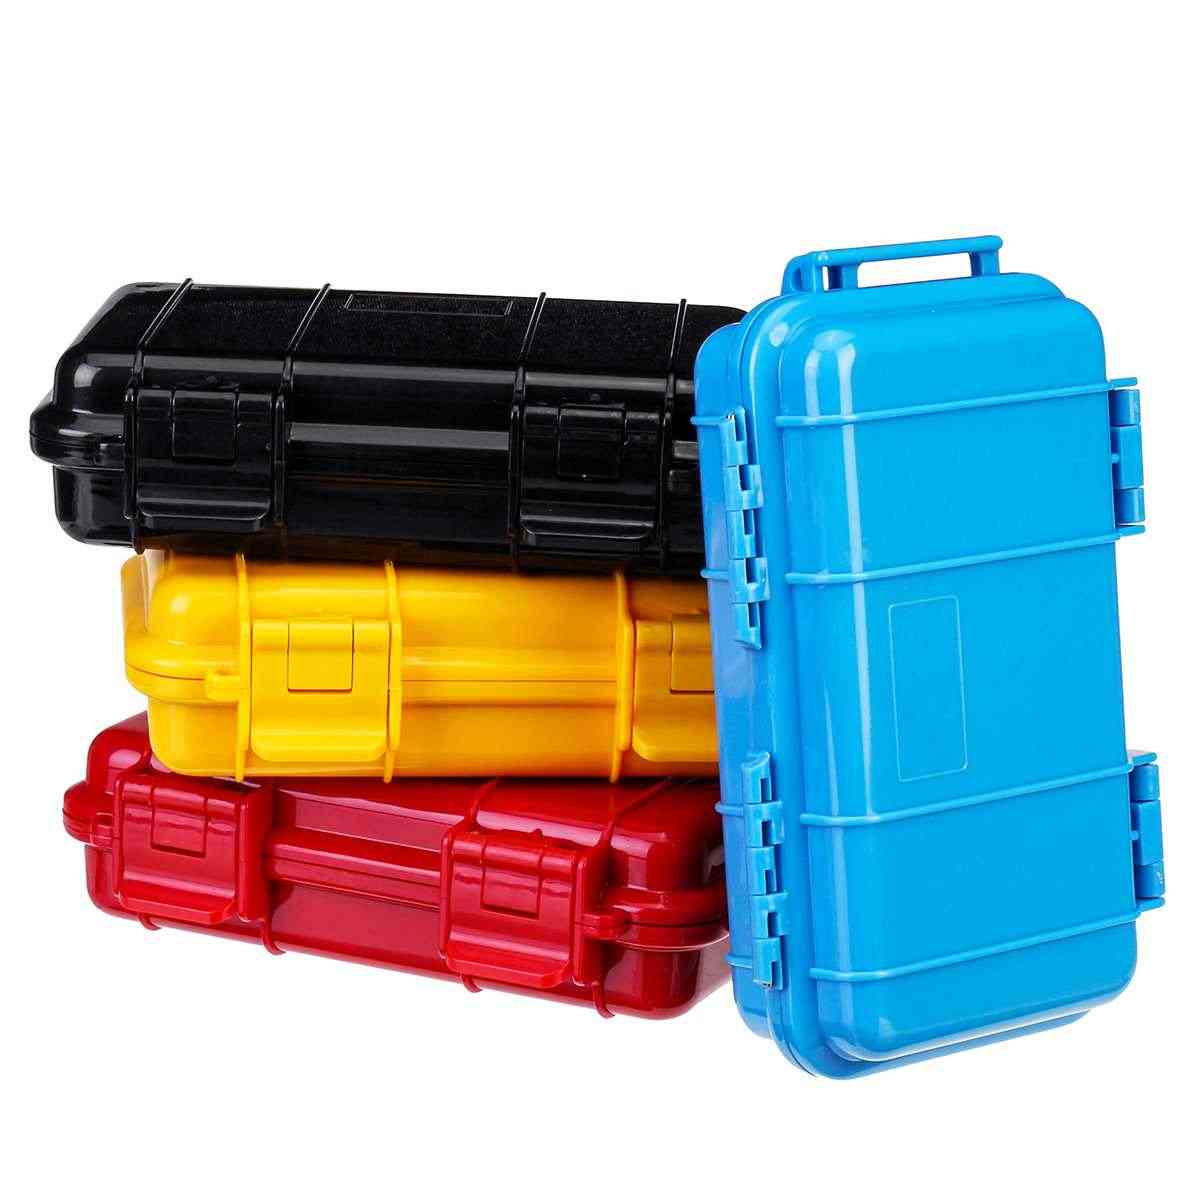 Shockproof & Waterproof Boxes, Outdoor Storage Carry Box